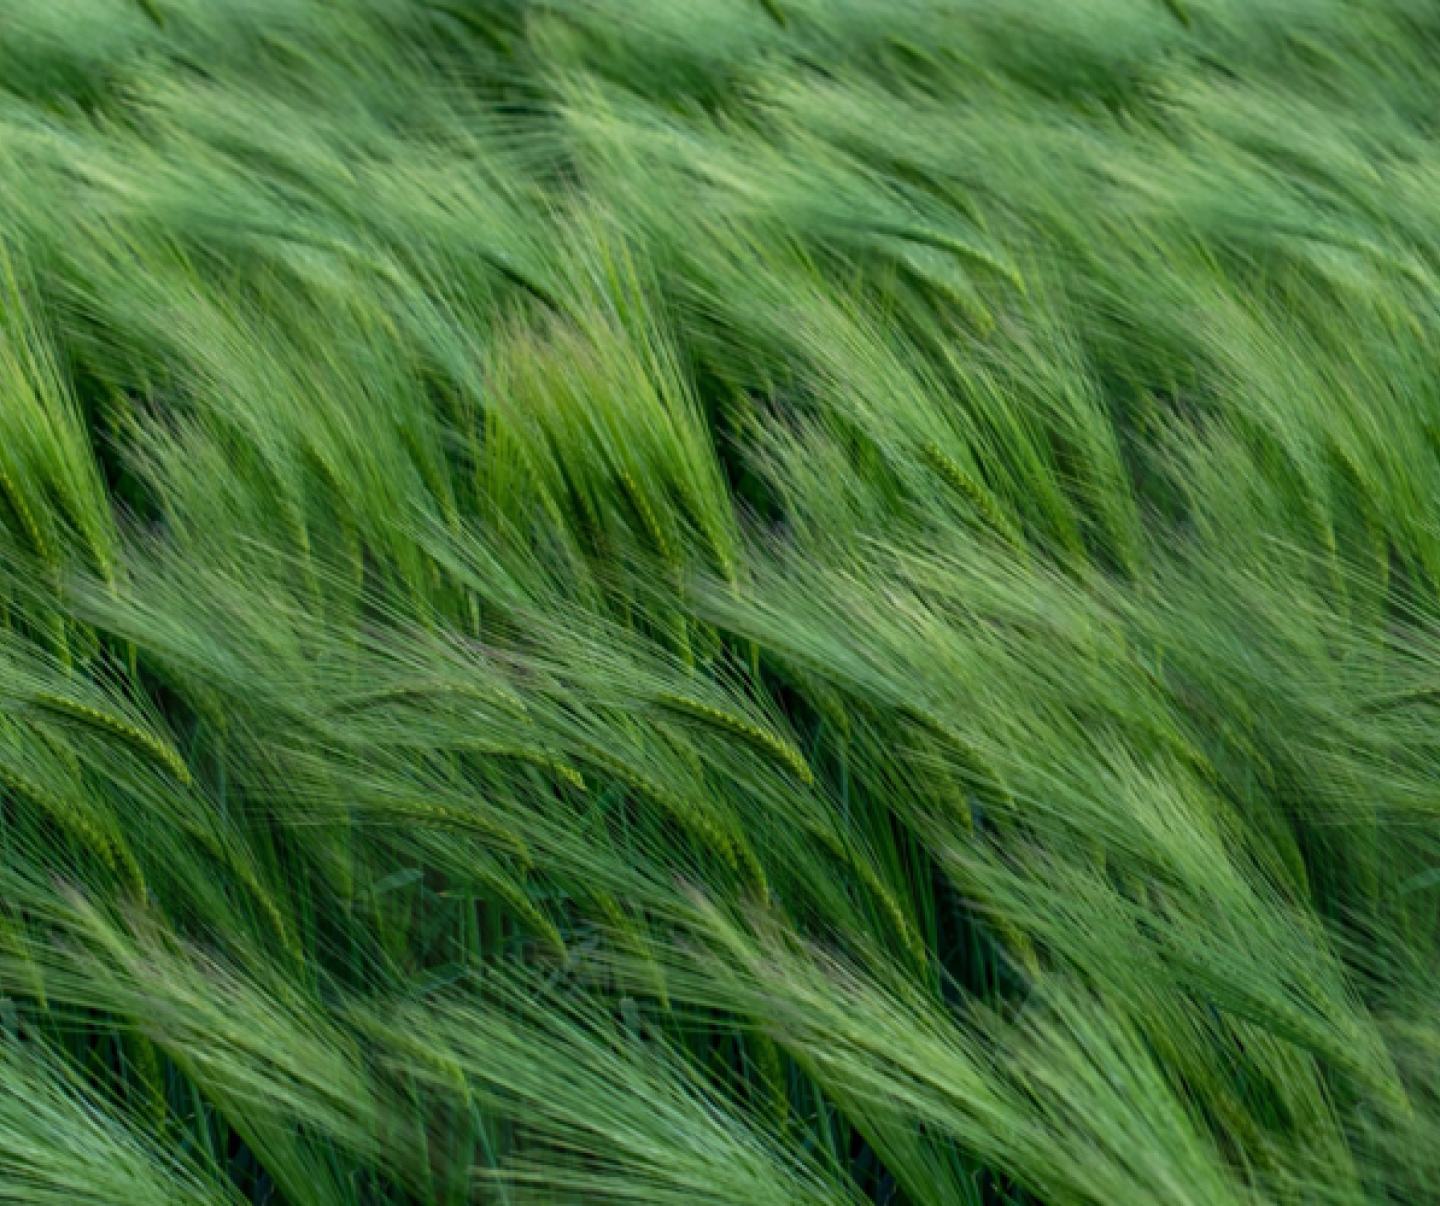 Young Wheat